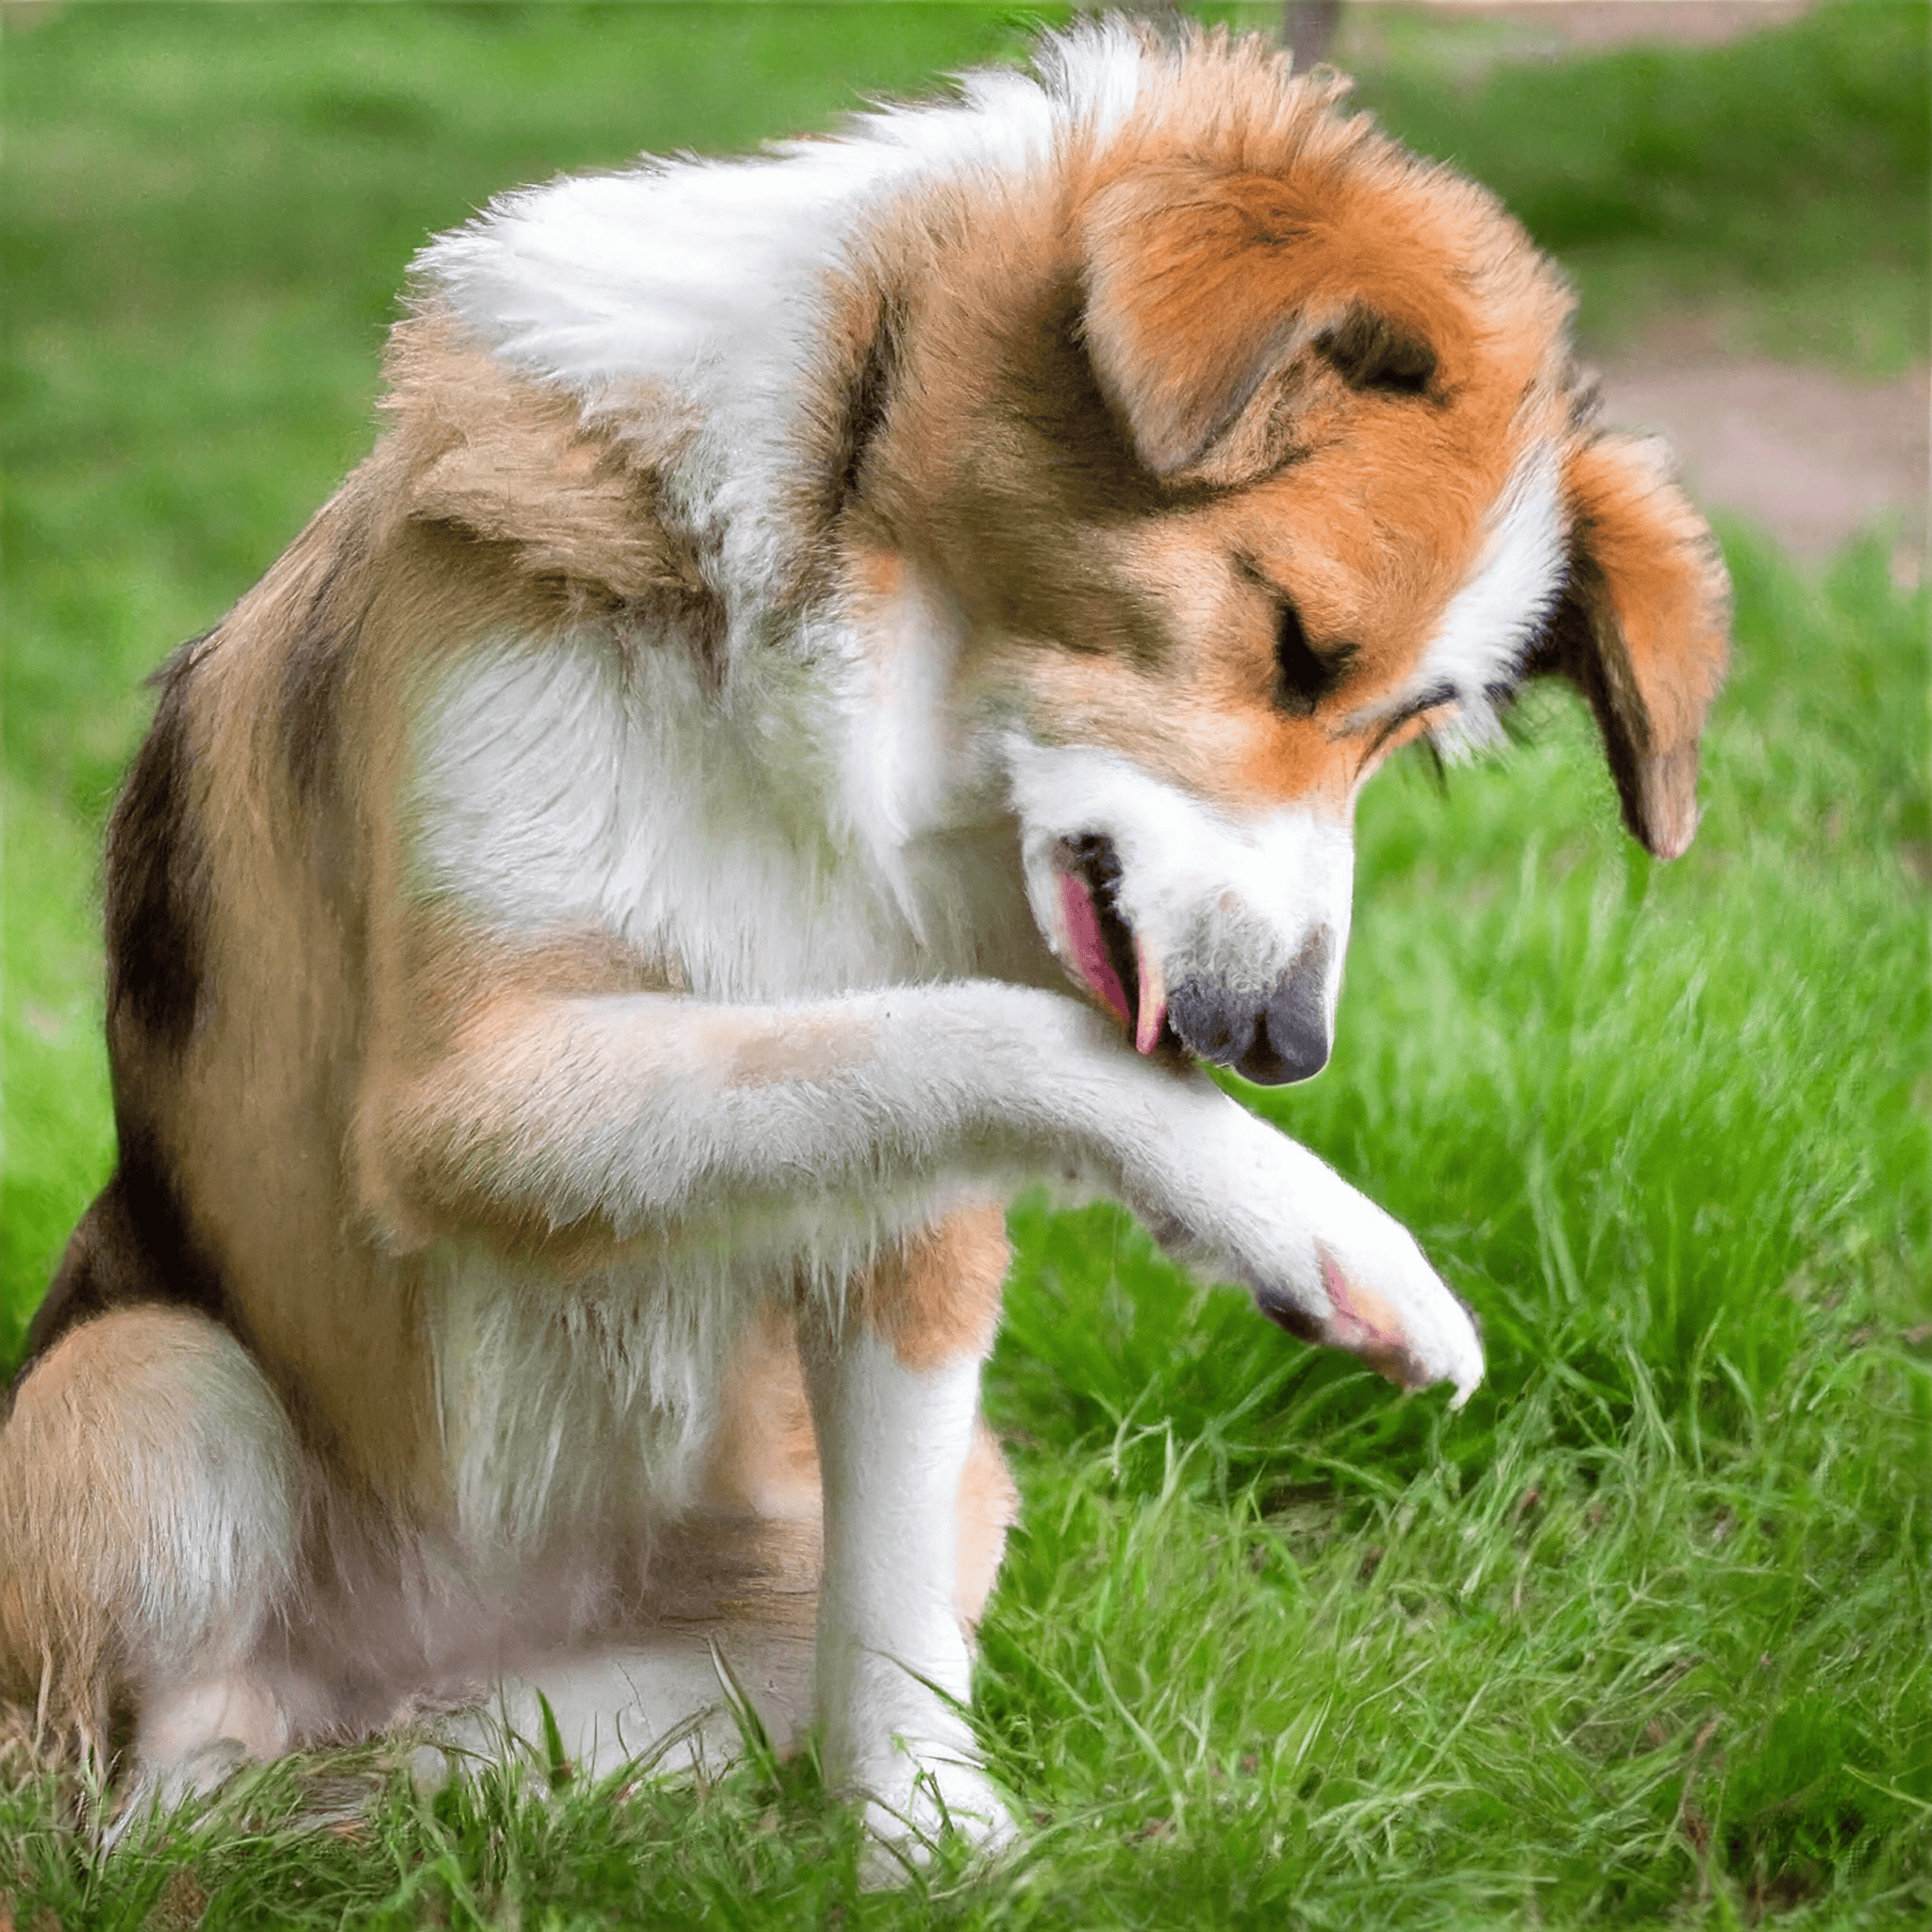 Dogs can have a medical condition that makes them lick their arms and paws. The underlying condition may be allergies. 